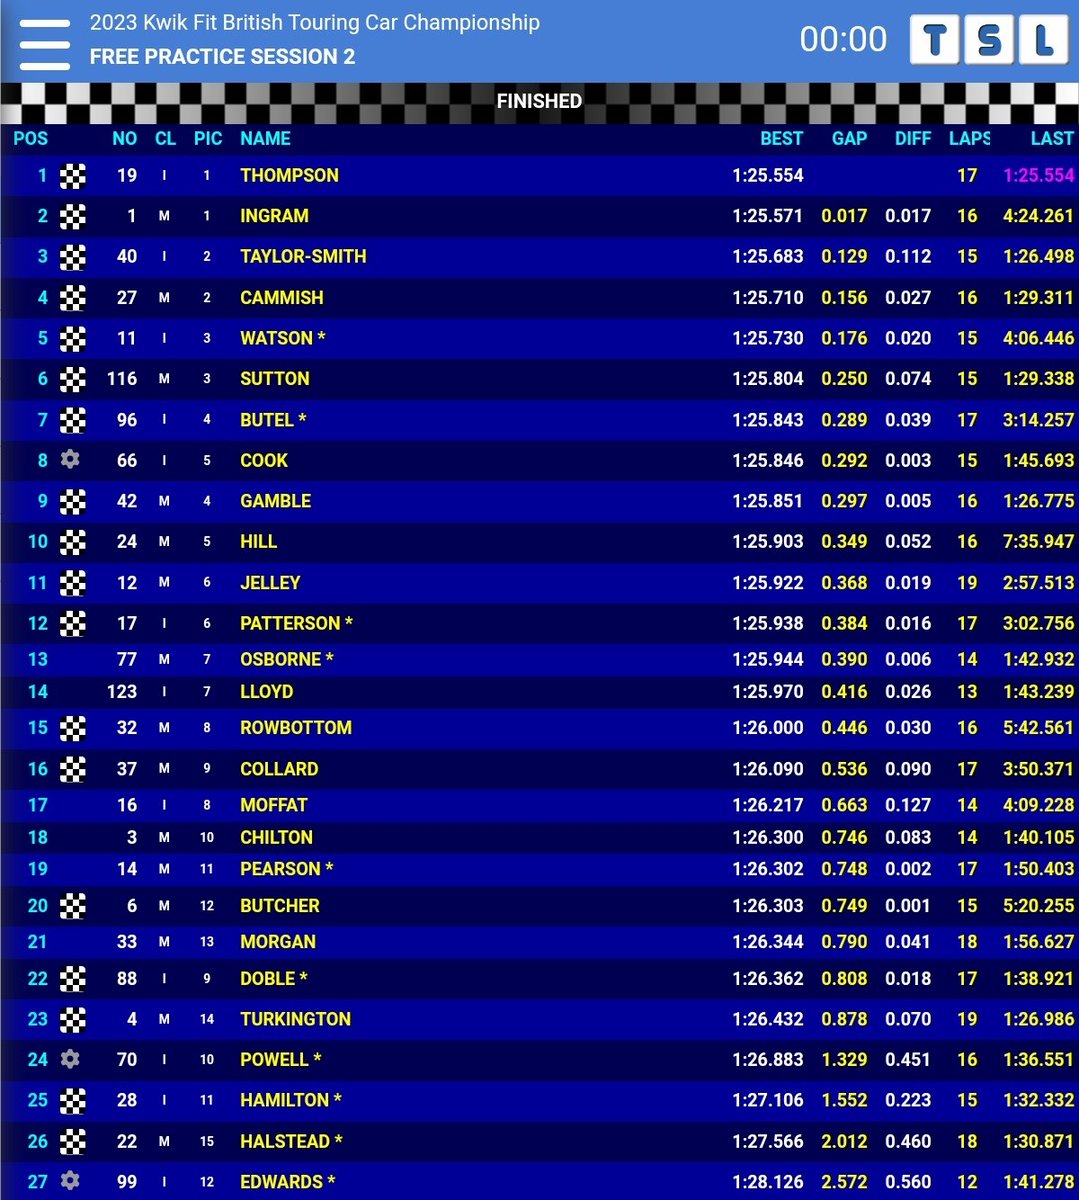 2023 KWIK FIT BTCC FREE PRACTICE 2 RESULTS (OULTON PARK ISLAND):

A late laptime of 1:25.554 gifts Bobby Thompson an unlikely top spot in FP2!

Tom Ingram is 2nd fastest and Aron Taylor-Smith is 3rd fastest!

#BTCC #BTCC2023